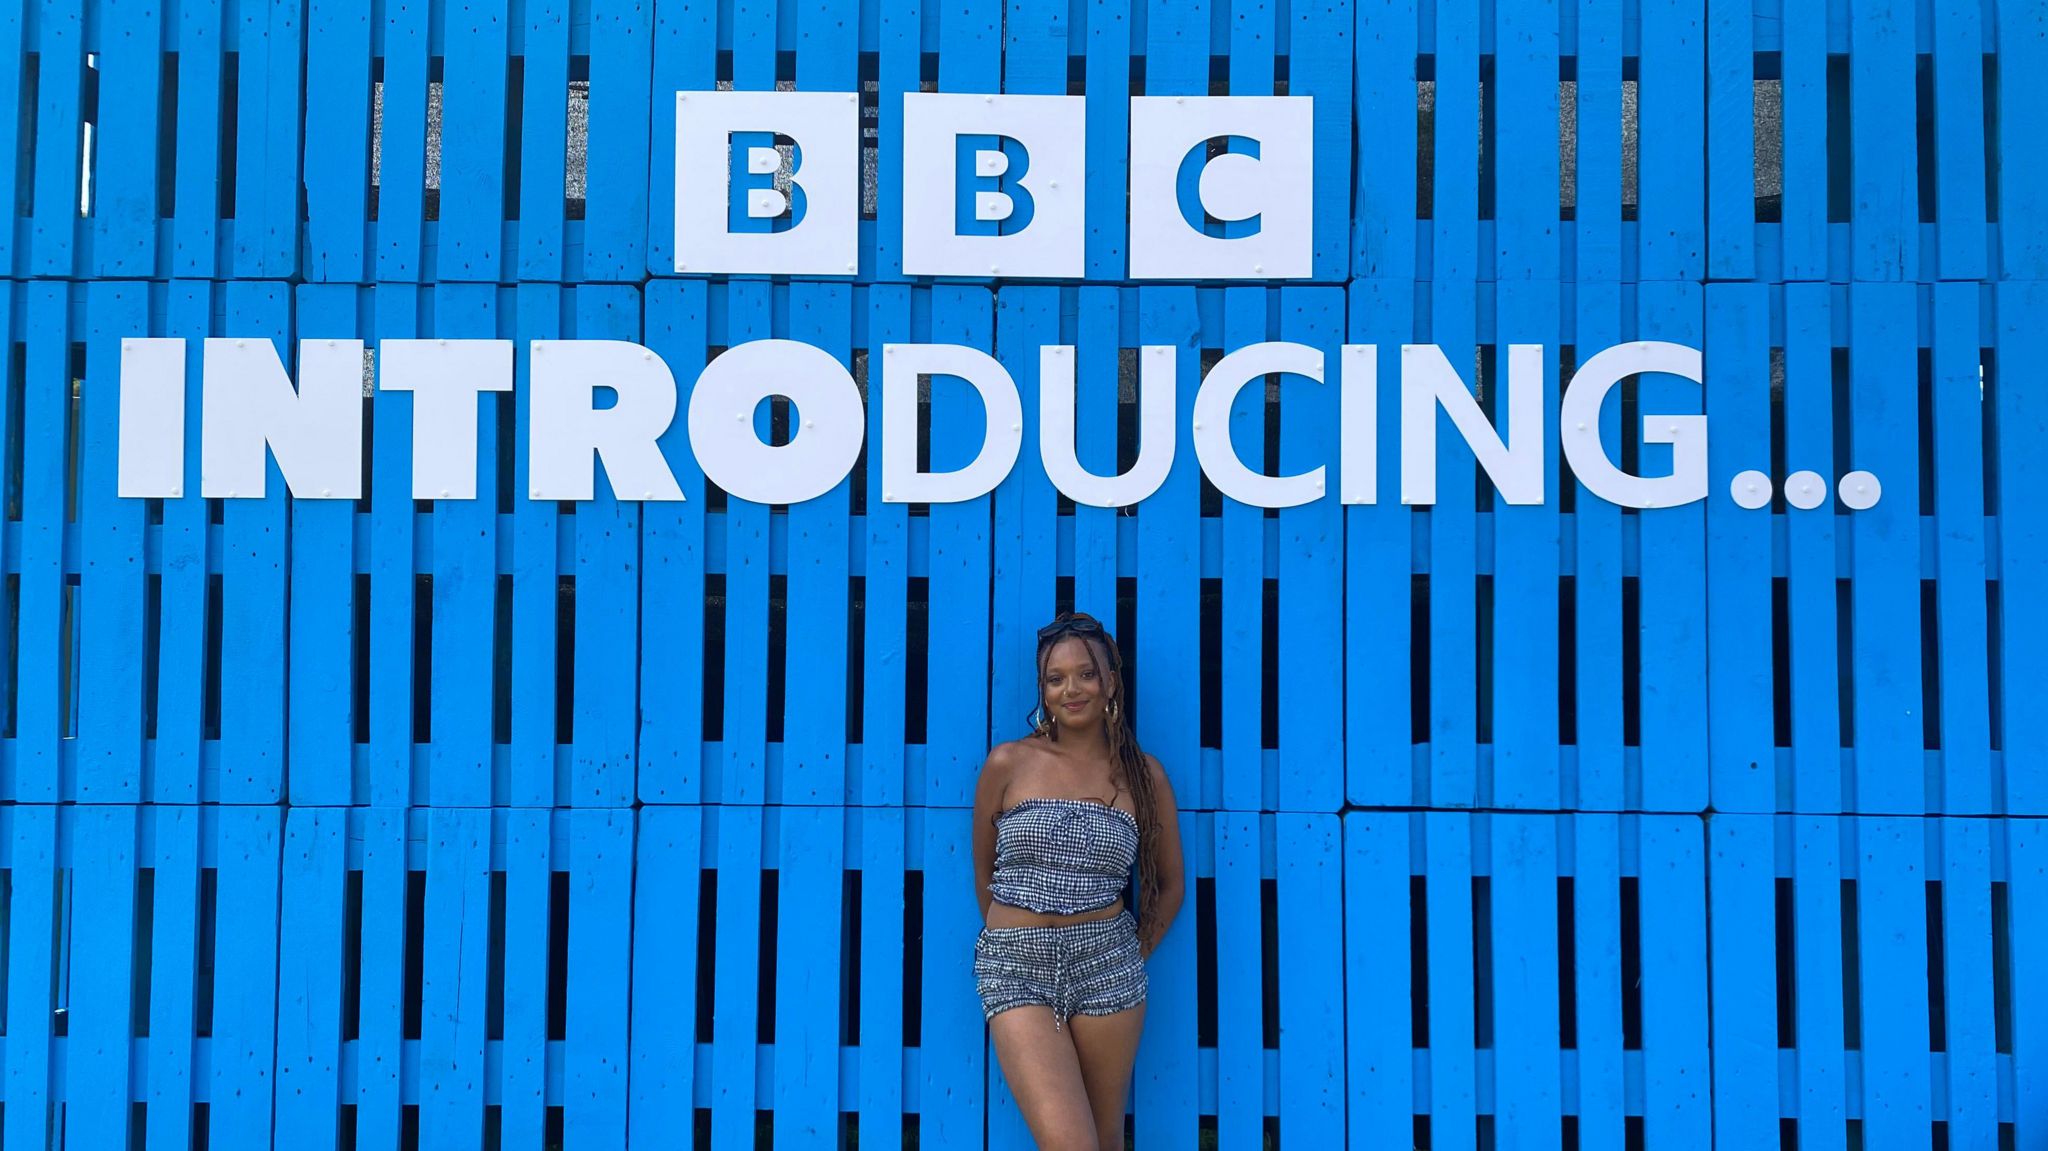 Tianna standing under a sign saying BBC Introducing with a completely blue backdrop